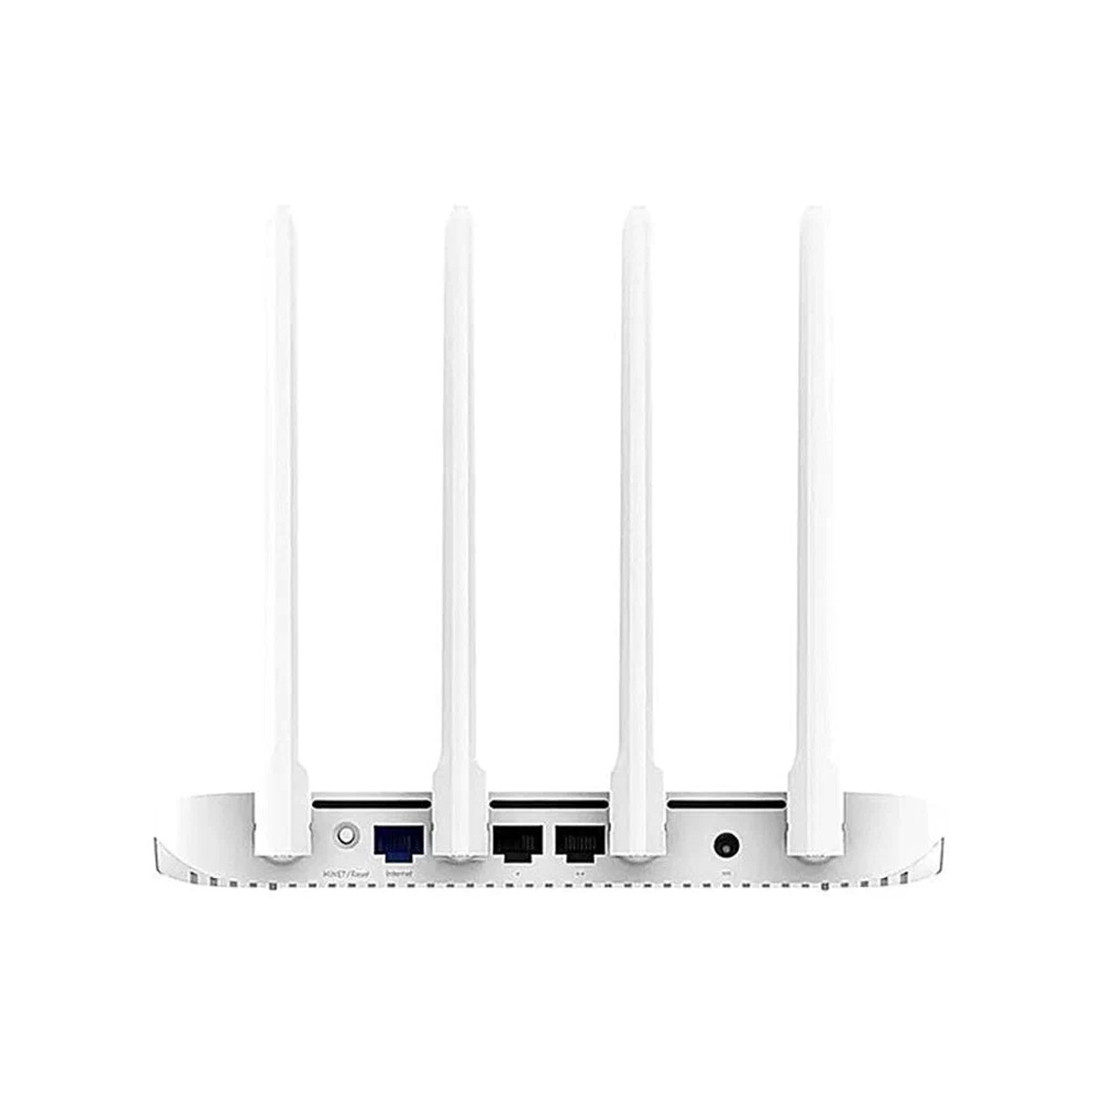 Маршрутизатор Wi-Fi AC1200 Xiaomi Router AC1200 - фото 3 - id-p114105100